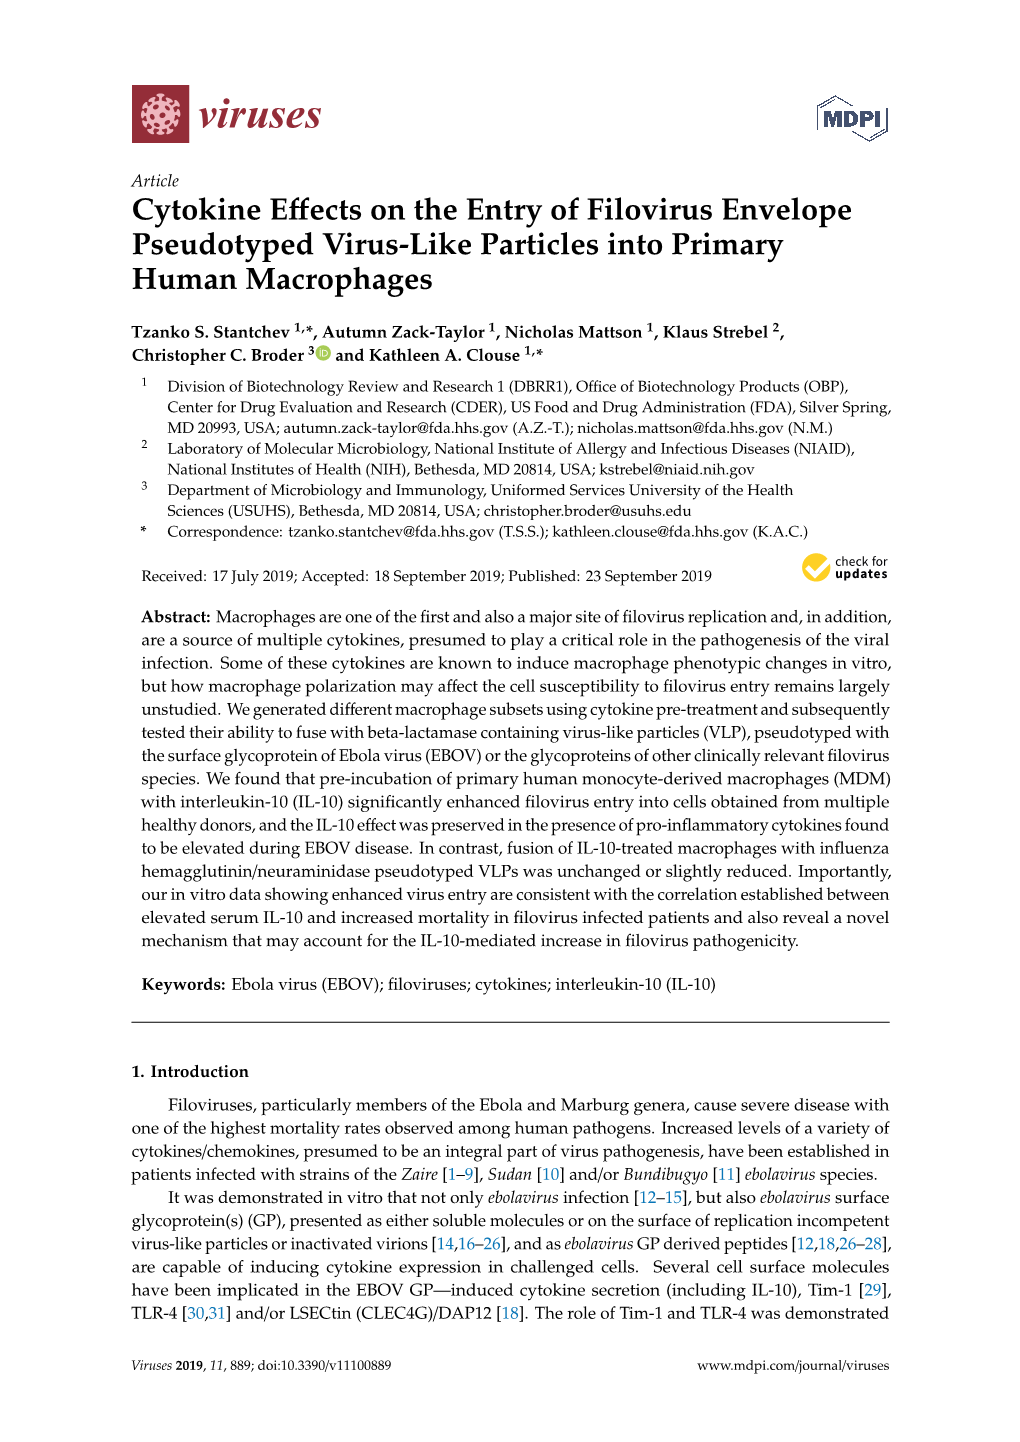 Cytokine Effects on the Entry of Filovirus Envelope Pseudotyped